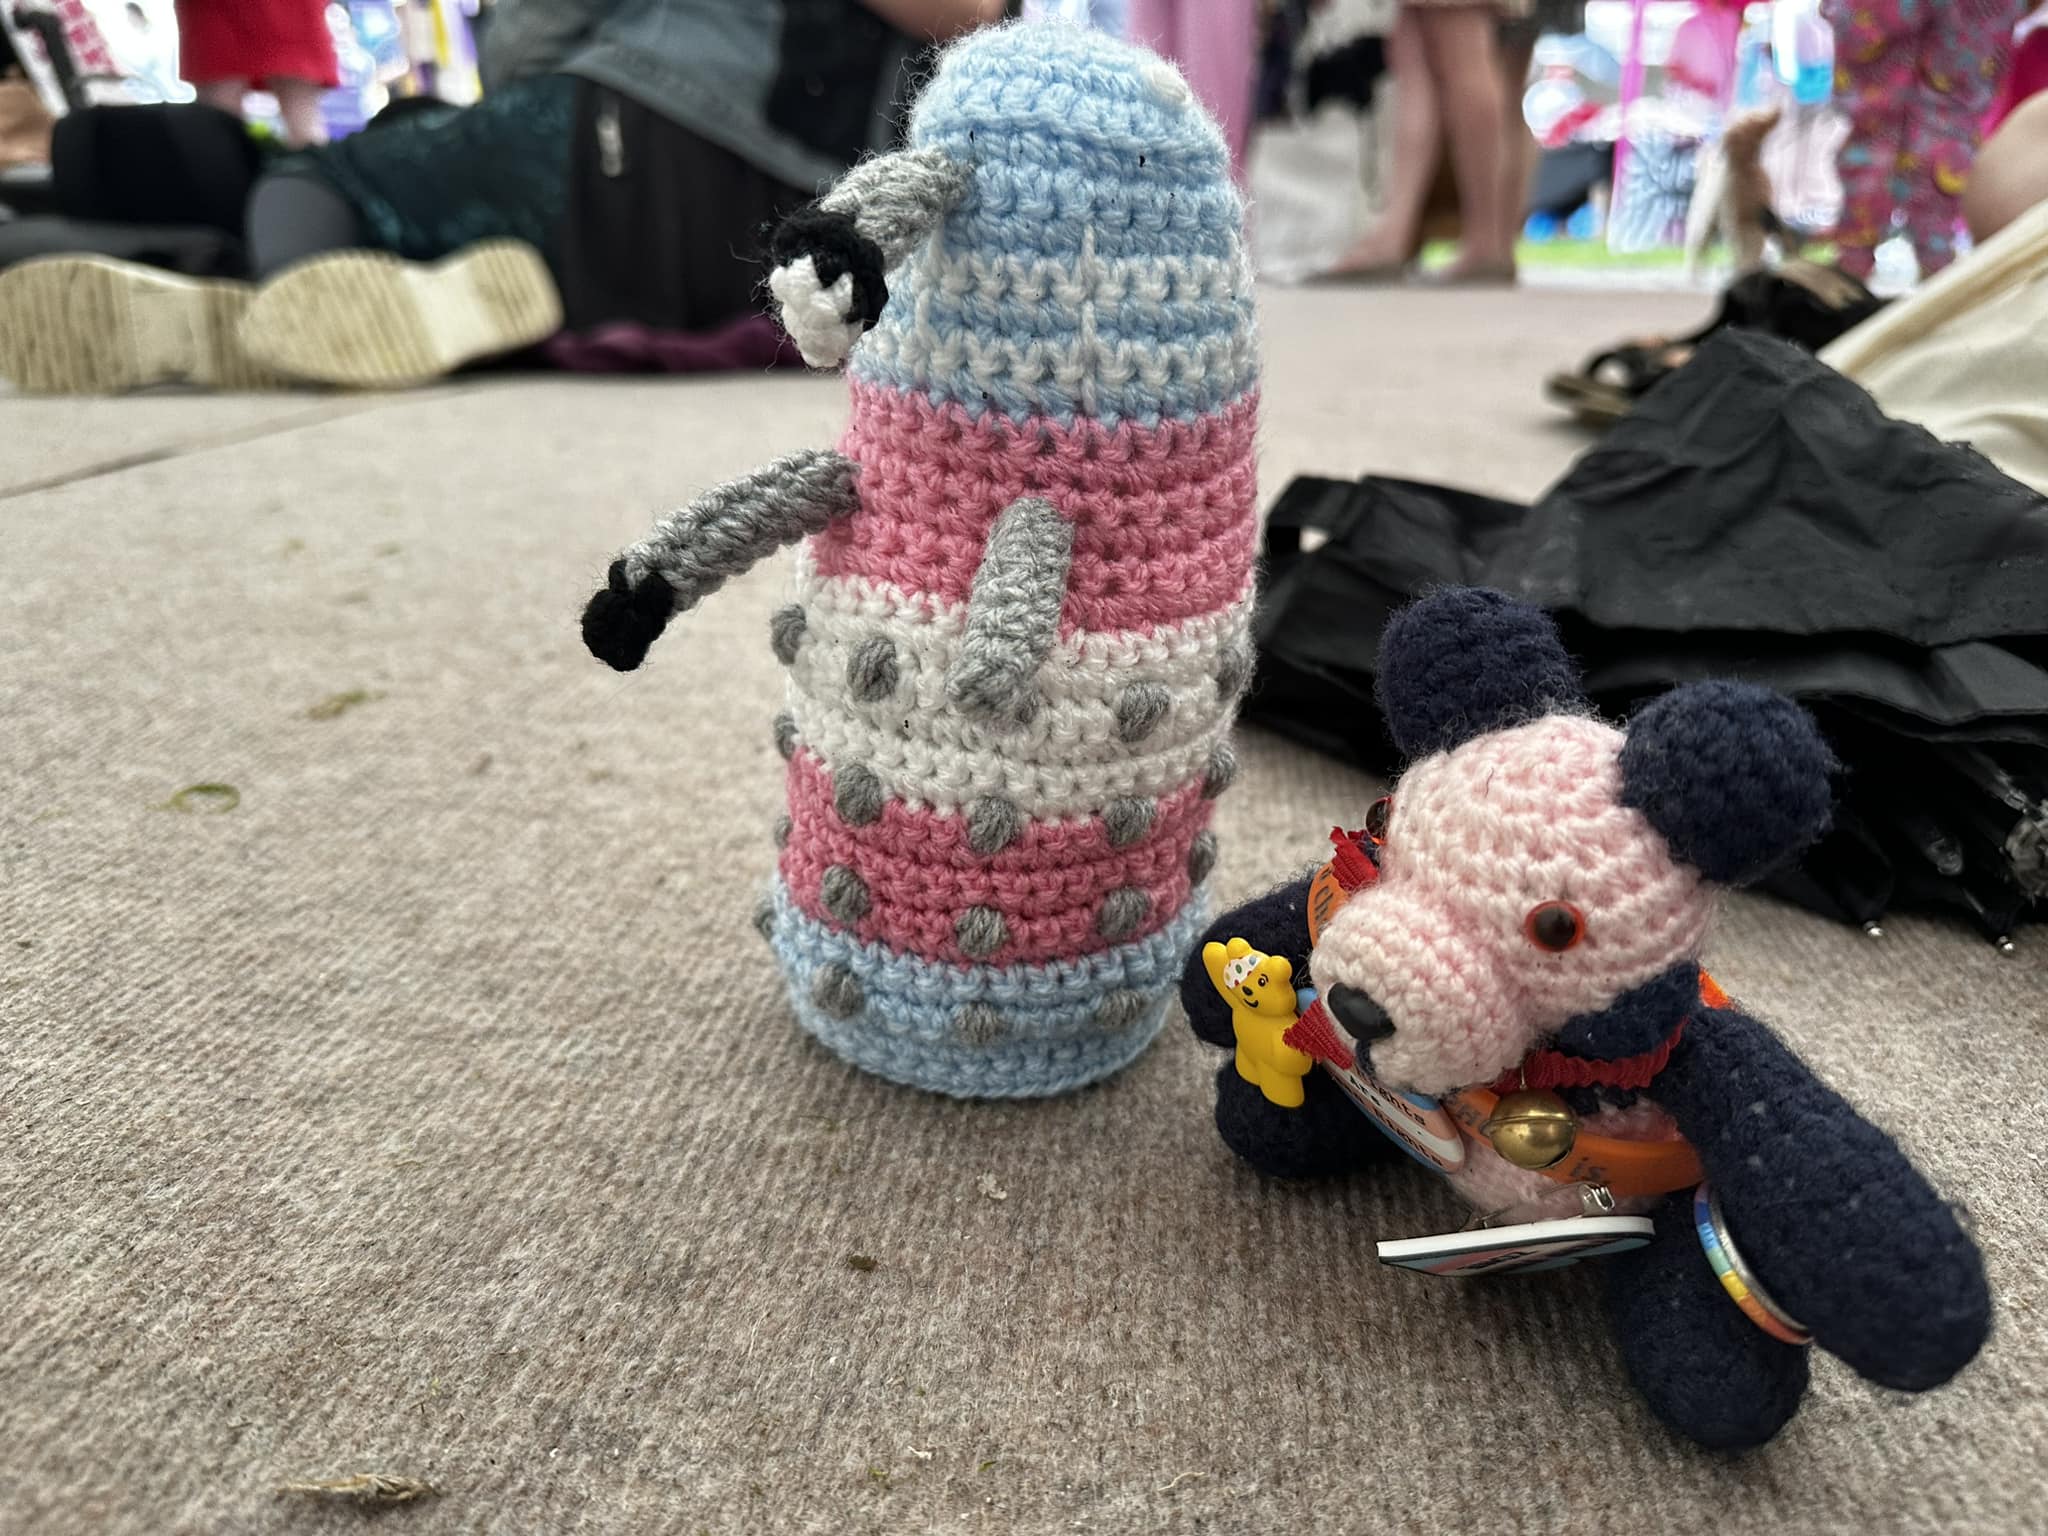 Crocheted panda and Dalek in a tent